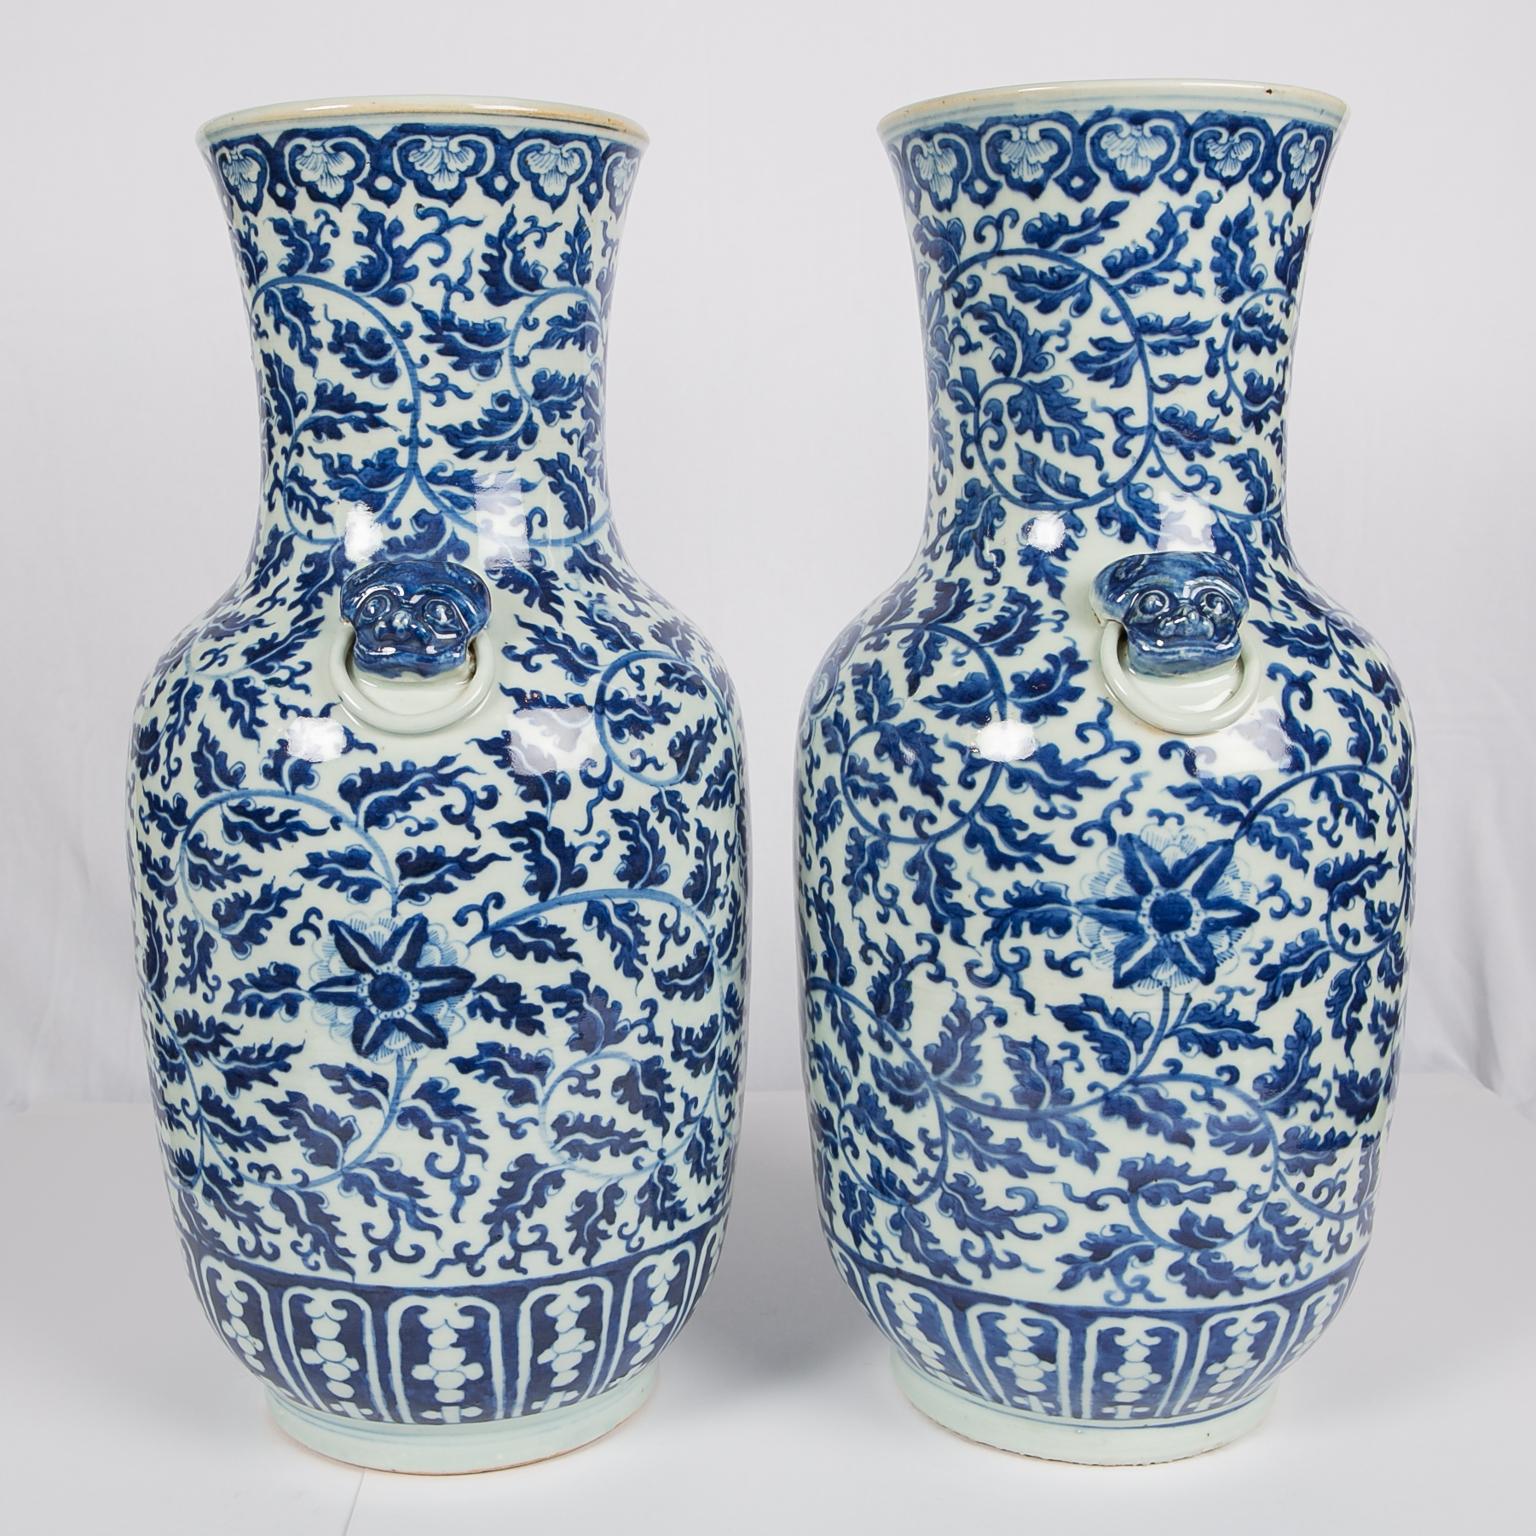 A pair of Chinese blue and white porcelain vases with an overall design of scrolling vines. Along the bottom are lotus panels. A band of ruyi-shaped floral patterns adorn the top. Two lion-head handles are attached to each vase.
Made in the Qing